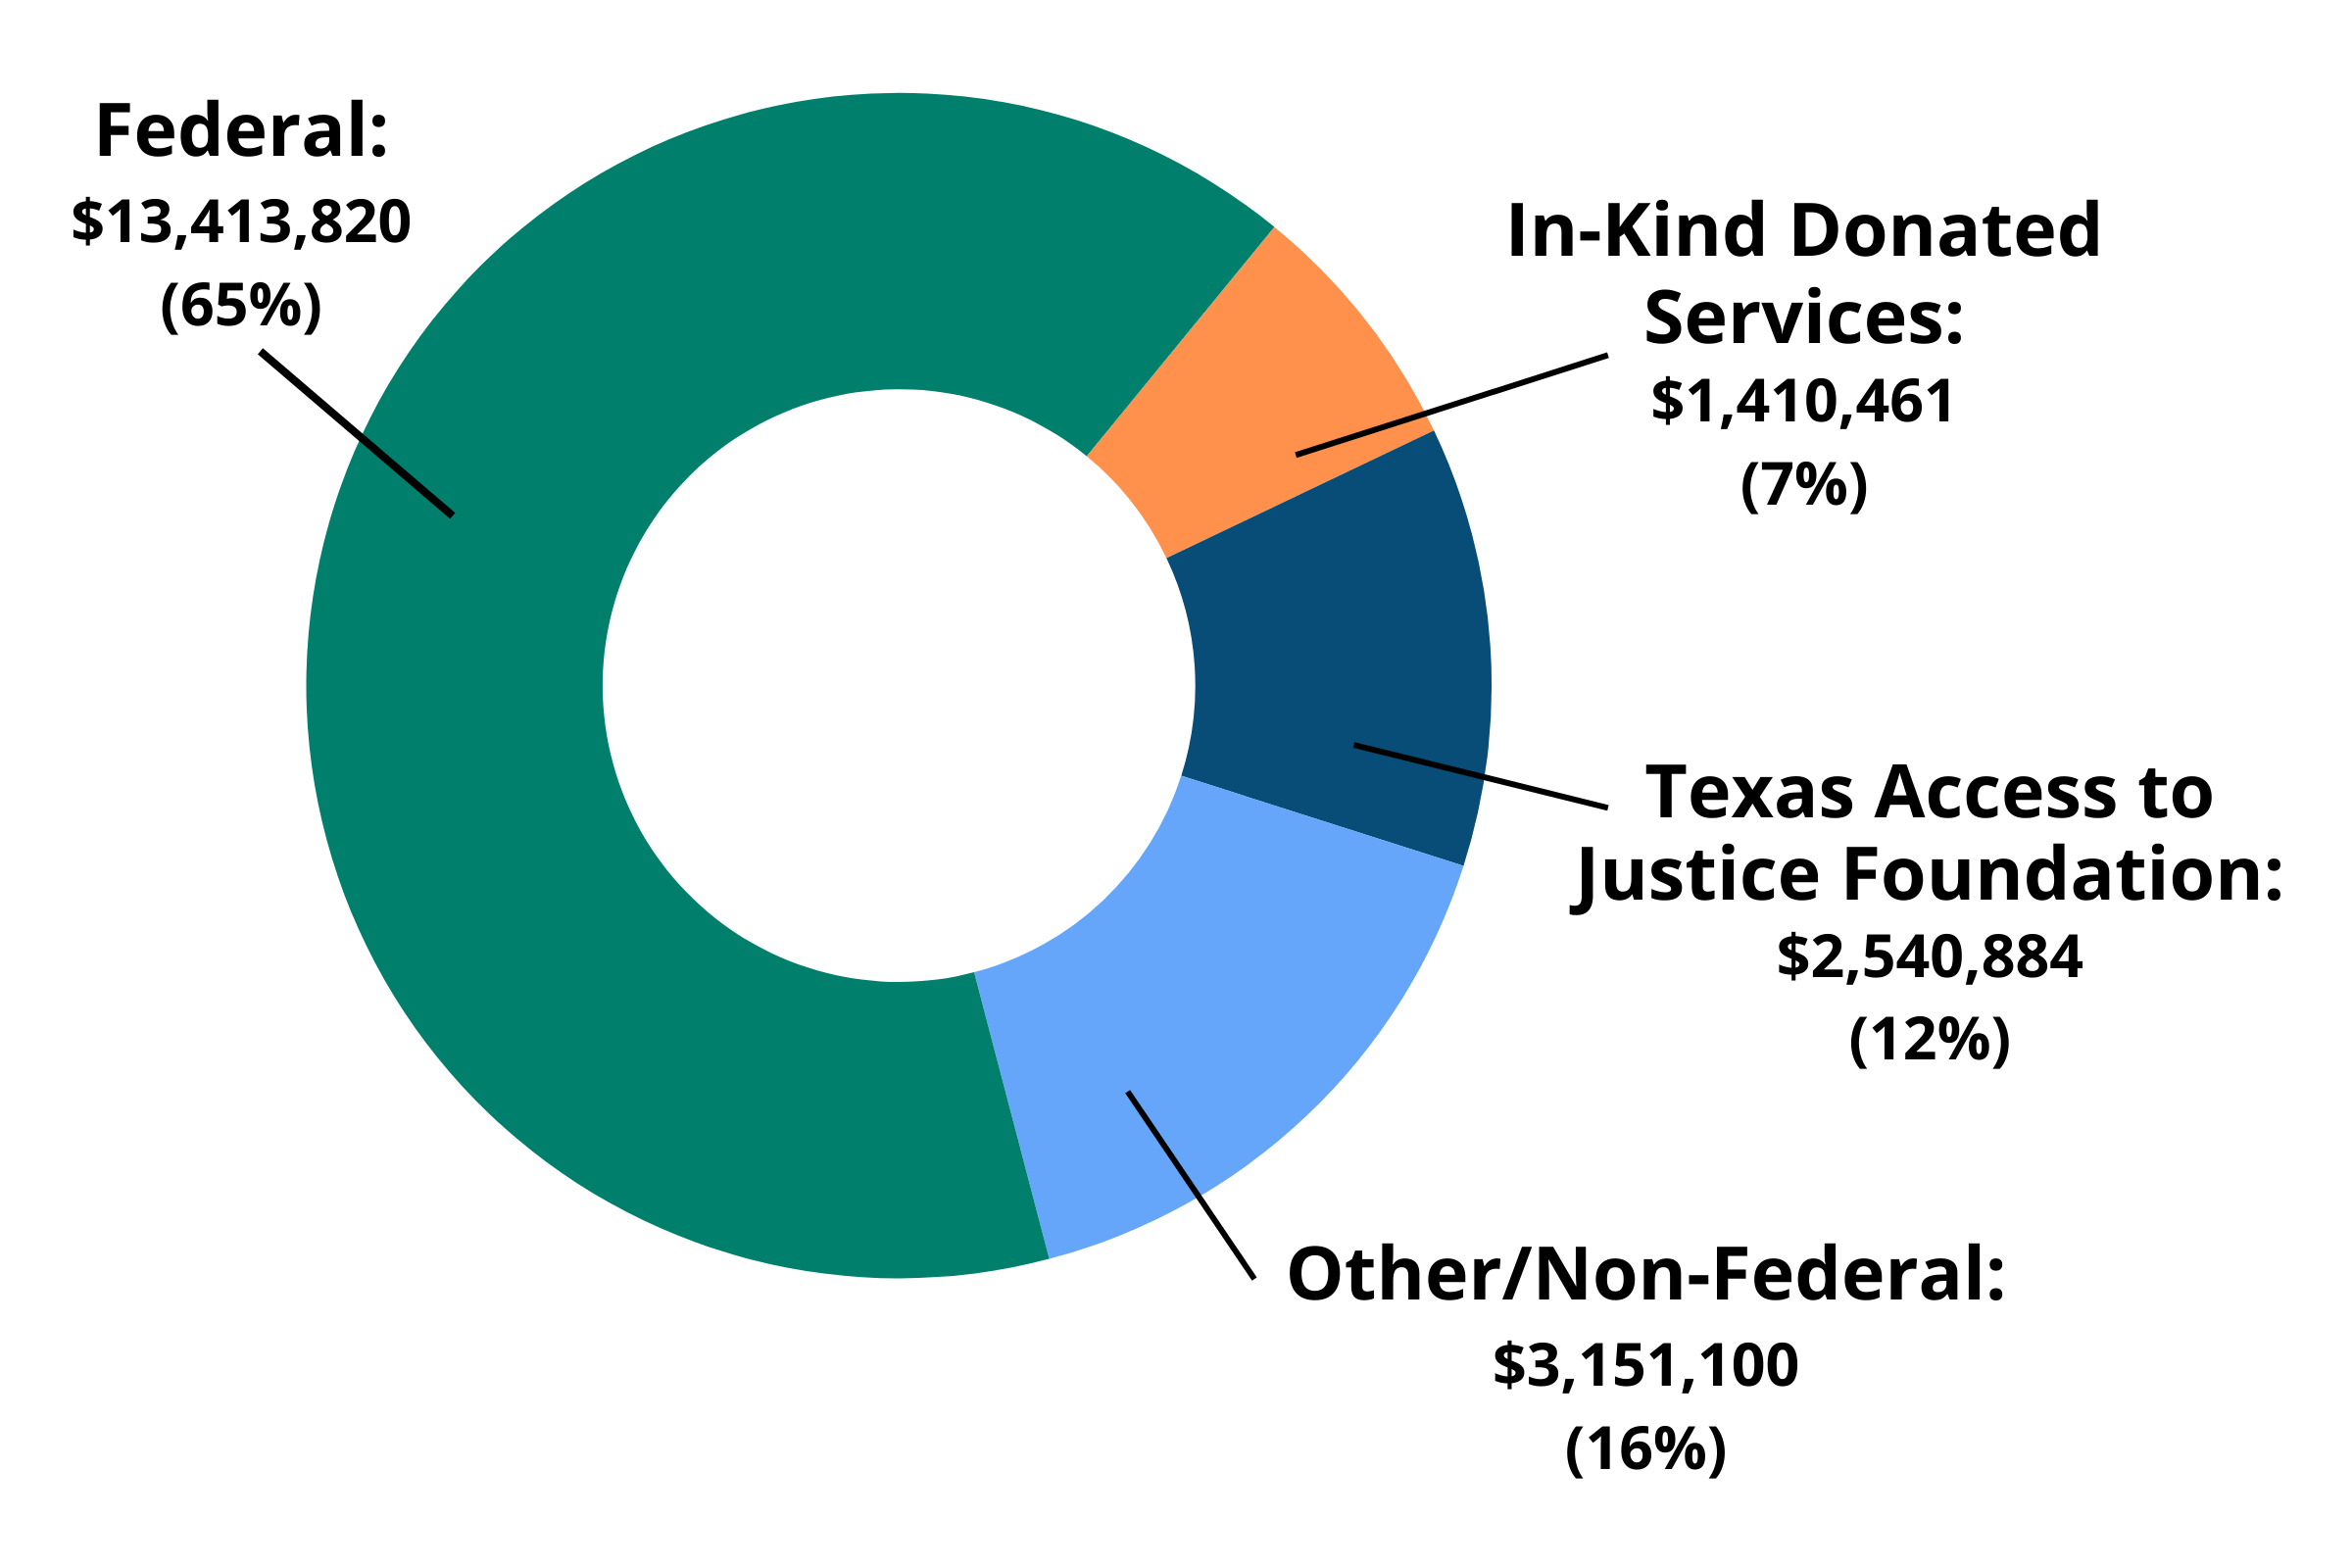 A pie chart showing DRTx funding sources. $13.4 million (65%) is federal funding, $3.1 million (16%) is from other non-federal sources, $2.5 million (12%) is from TAJF, and $1.4 million is from In-Kind Donated Services (7%).